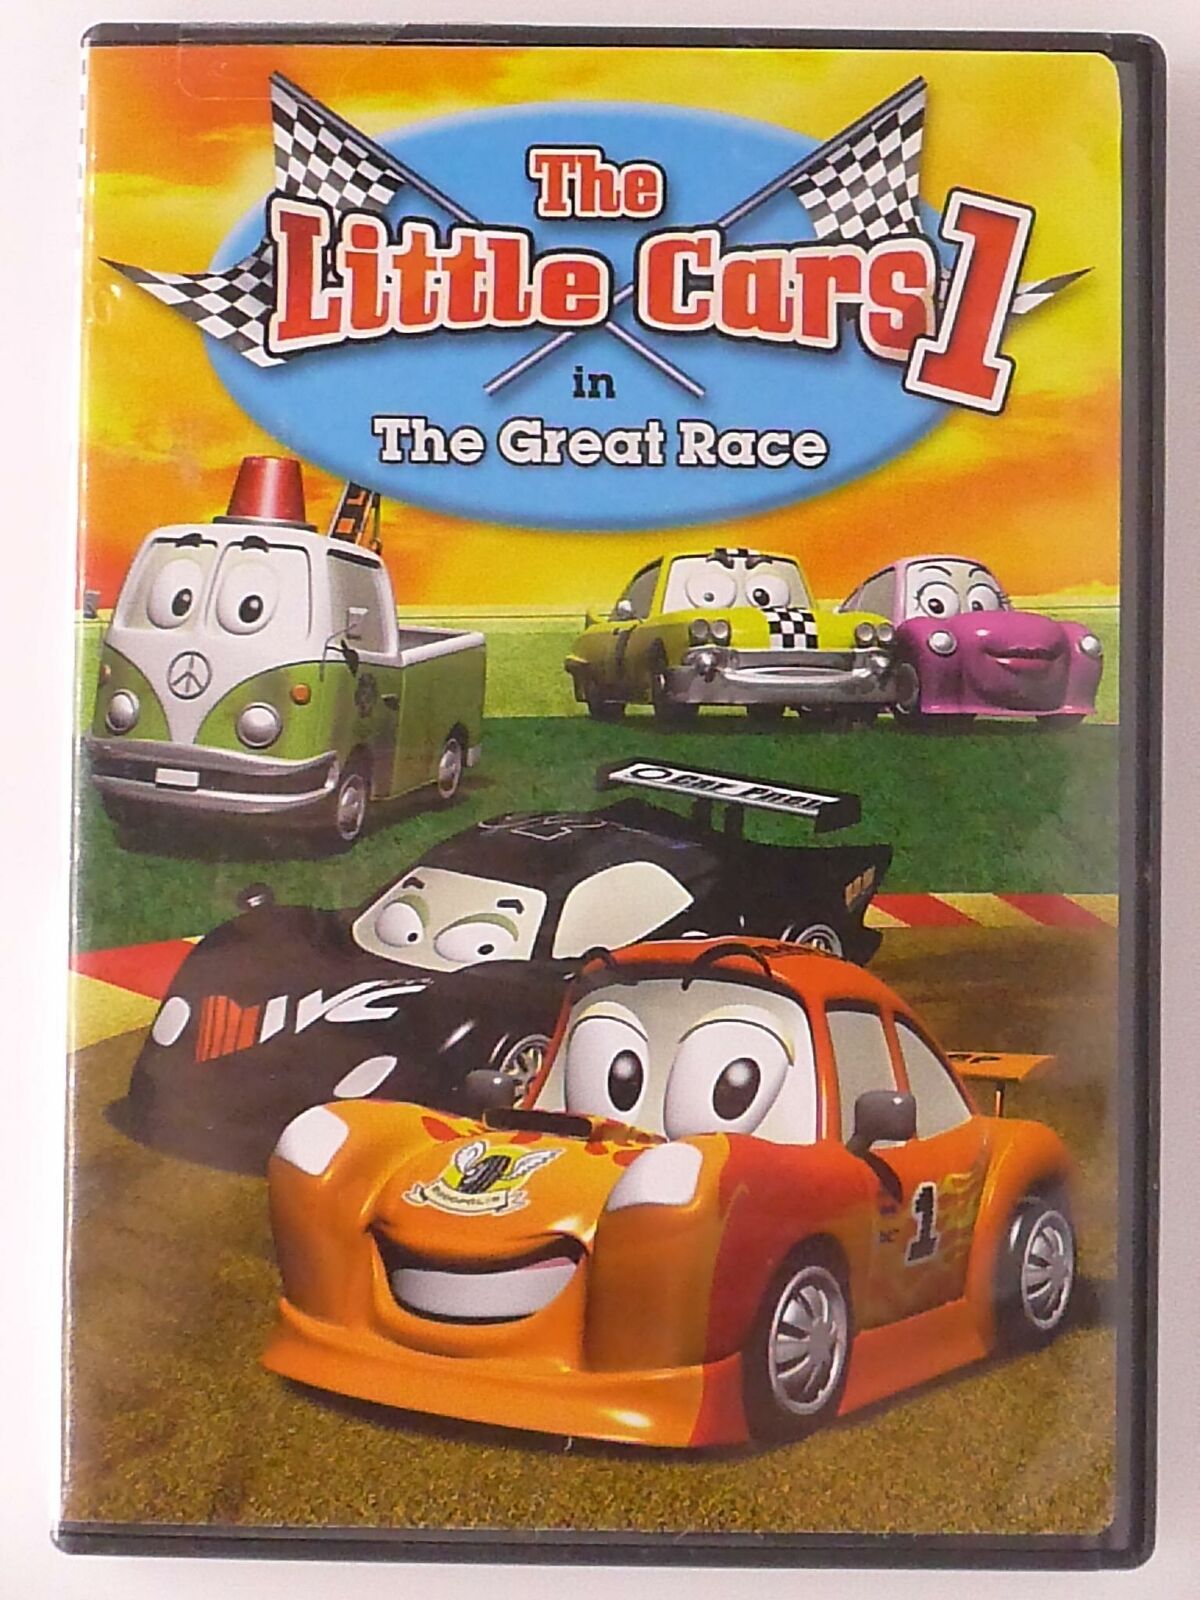 The Little Cars 1 in The Great Race (DVD, 2006) - G1122